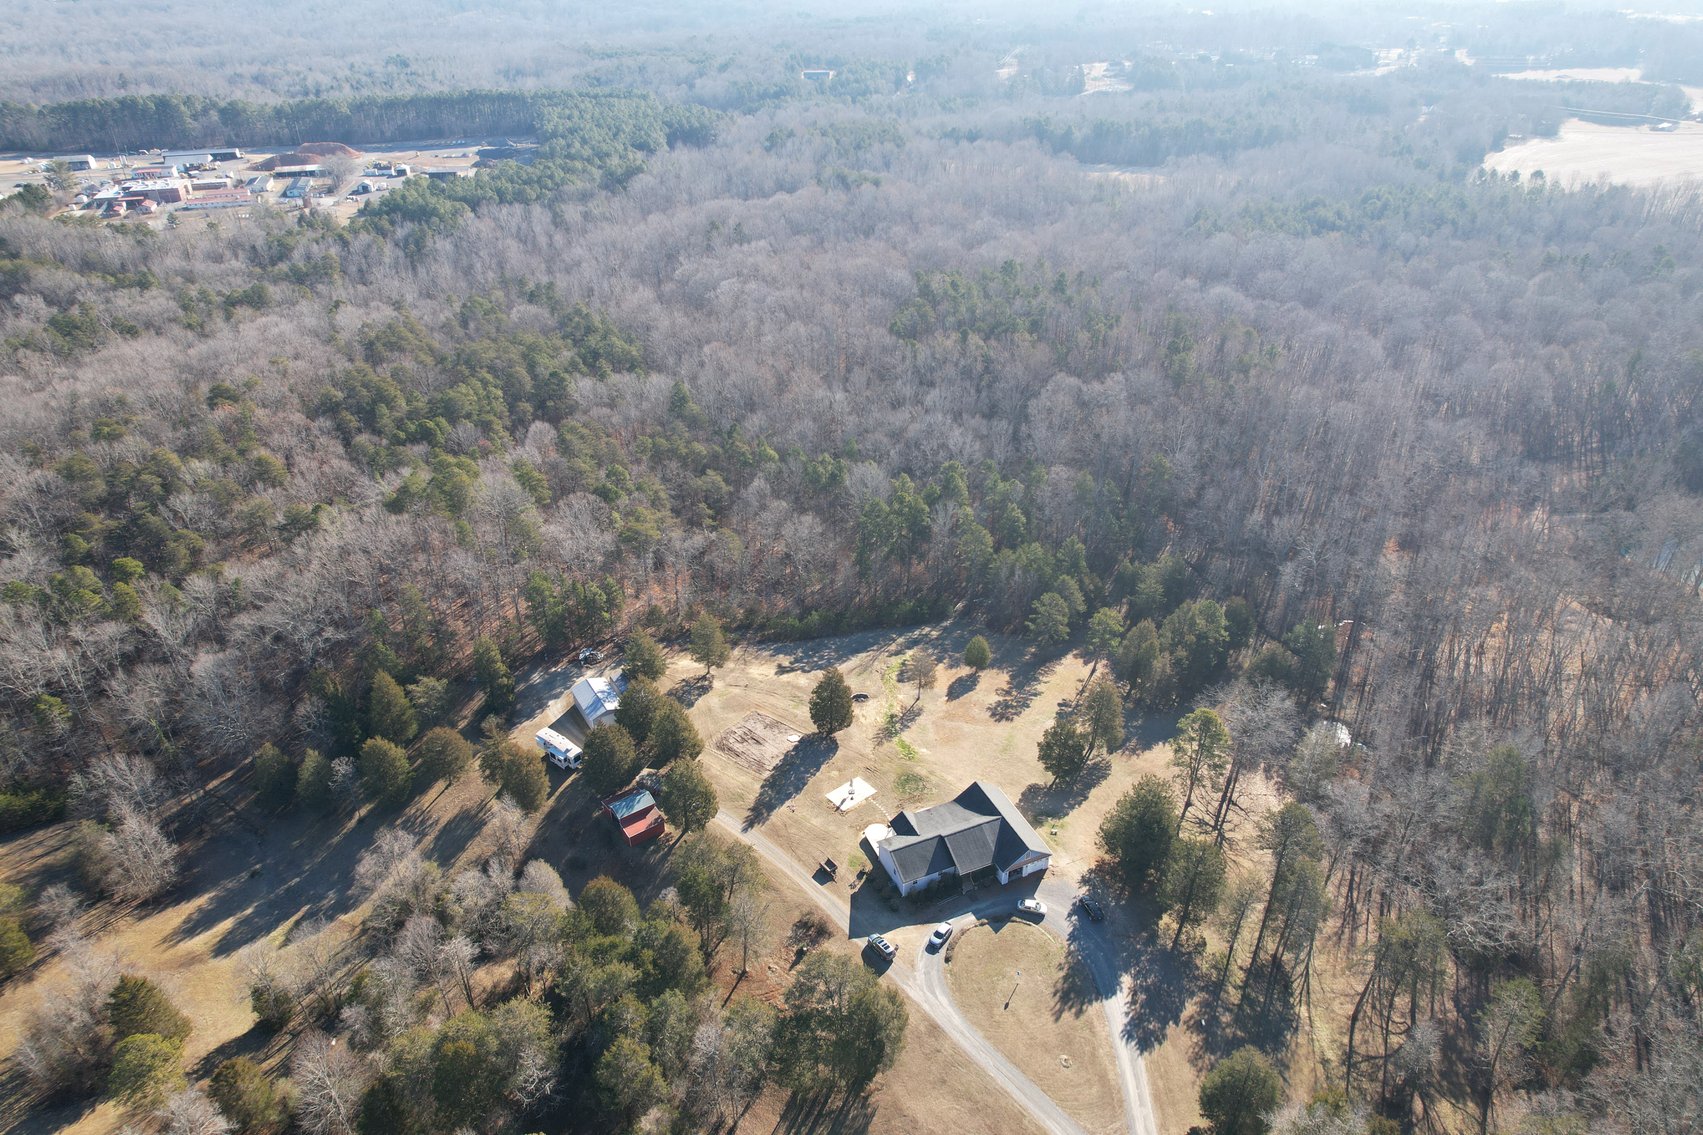 Absolute Auction for Davie County Home on 24 +/- Acres